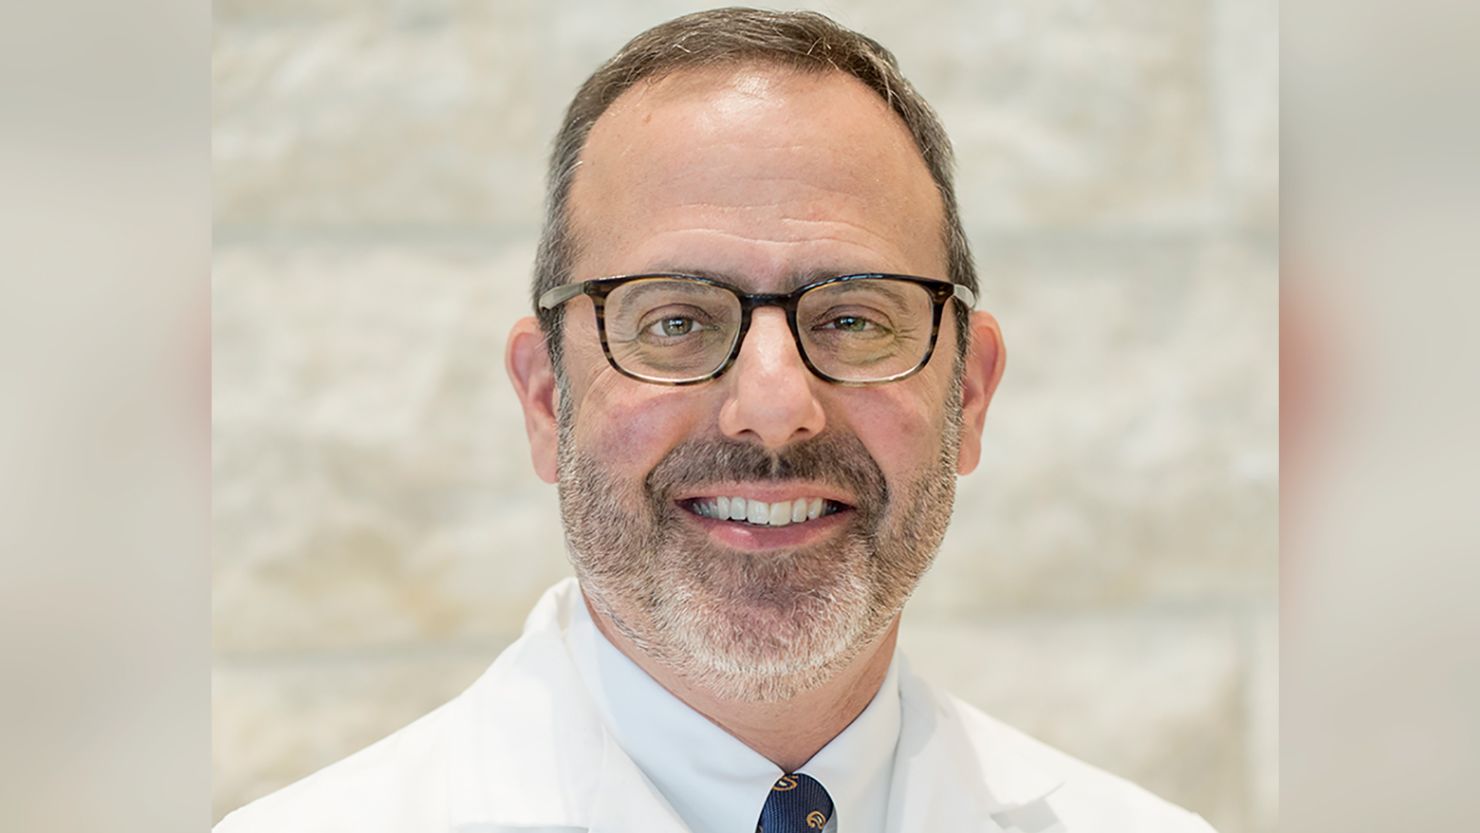 Dr. Joseph Costa, the chief of critical care at Baltimore's Mercy Medical Center who treated the sickest Covid-19 patients, succumbed to the virus Saturday at the age of 56, the hospital confirmed to CNN